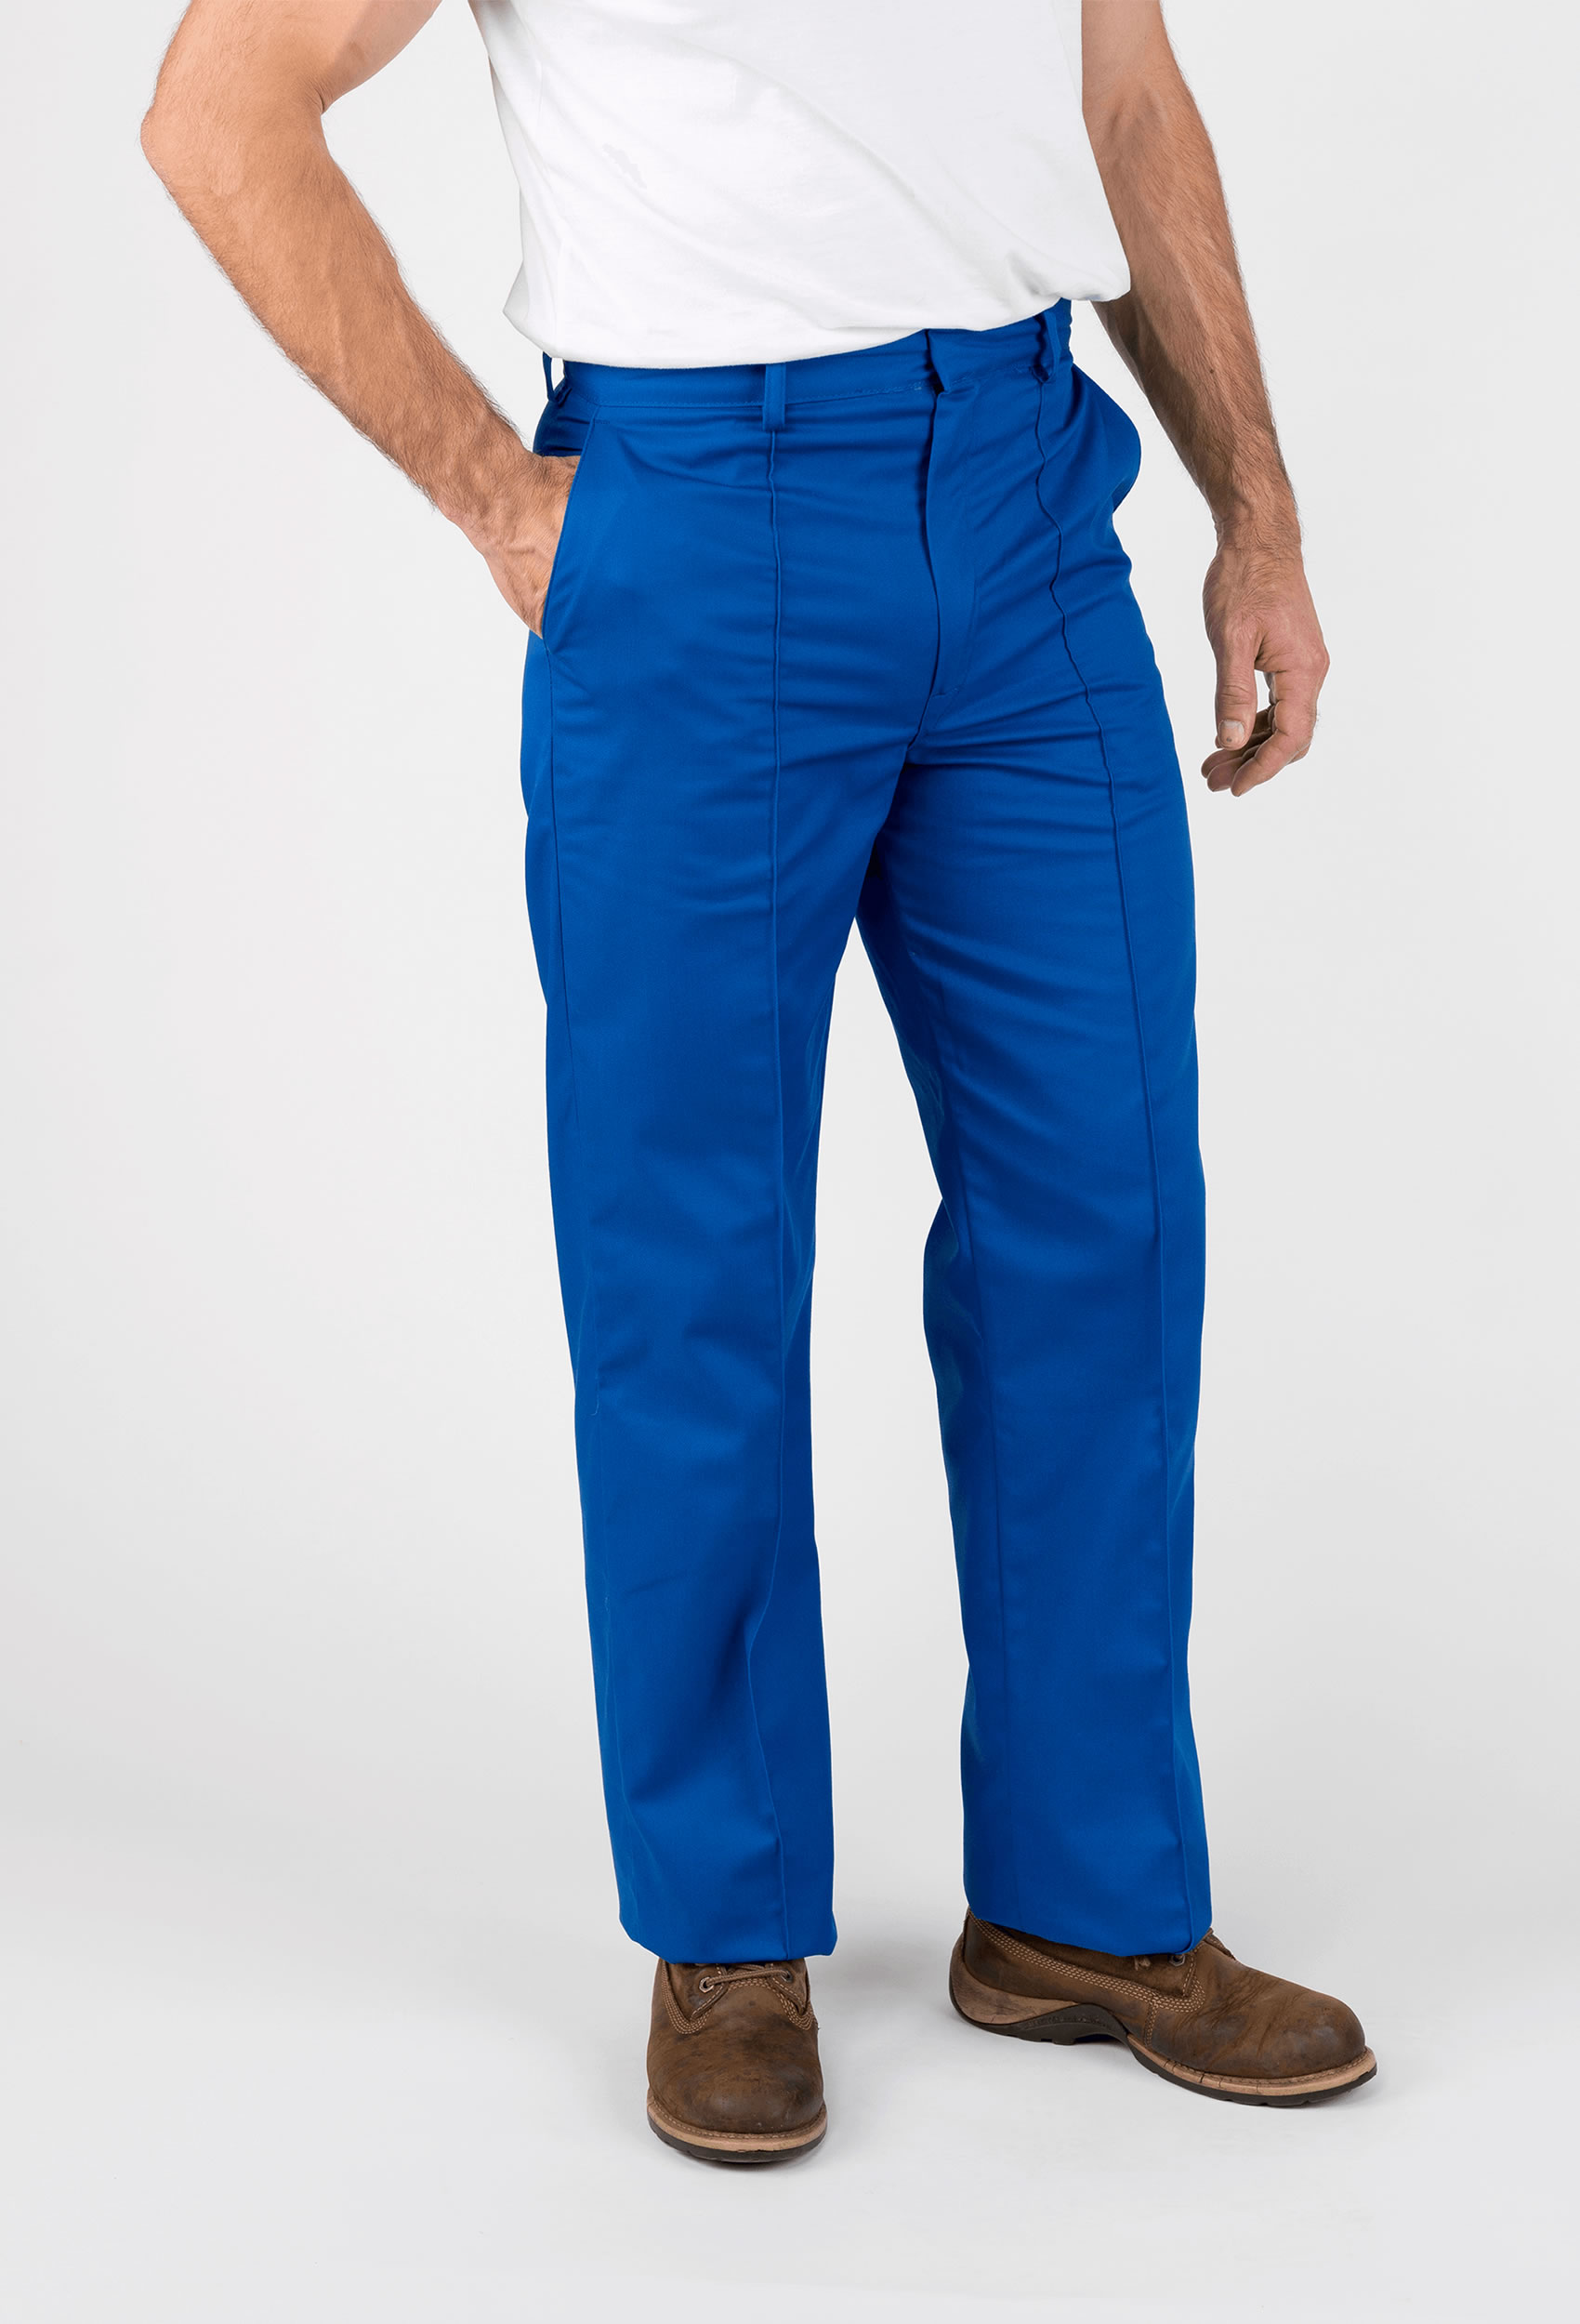 Food Manufacturing Trousers| Workwear Trousers Rental | CLEAN